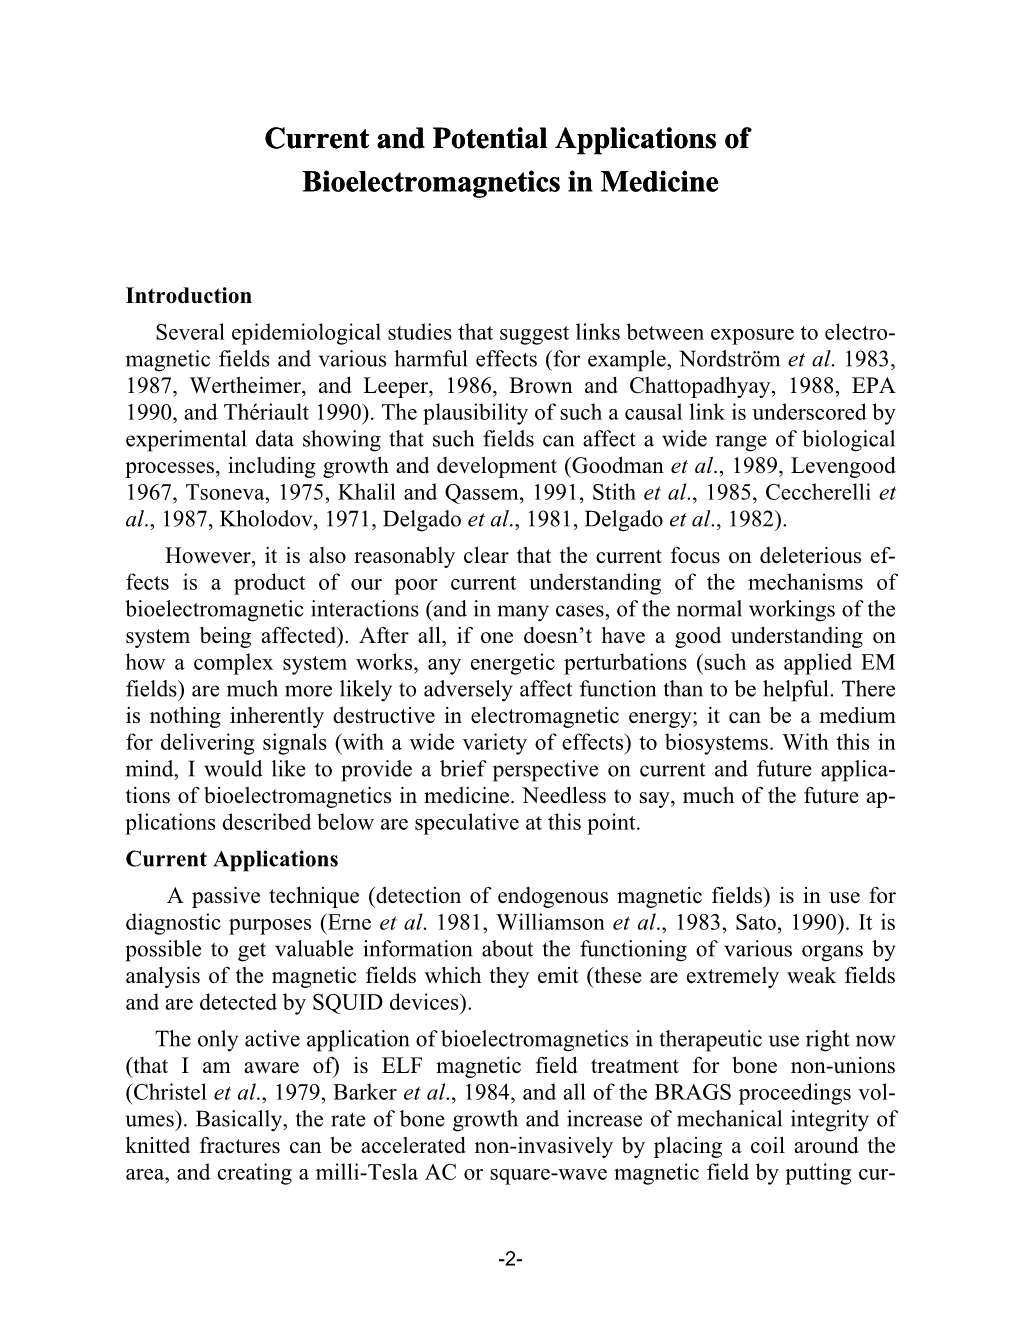 Current and Potential Applications of Bioelectromagnetics in Medicine